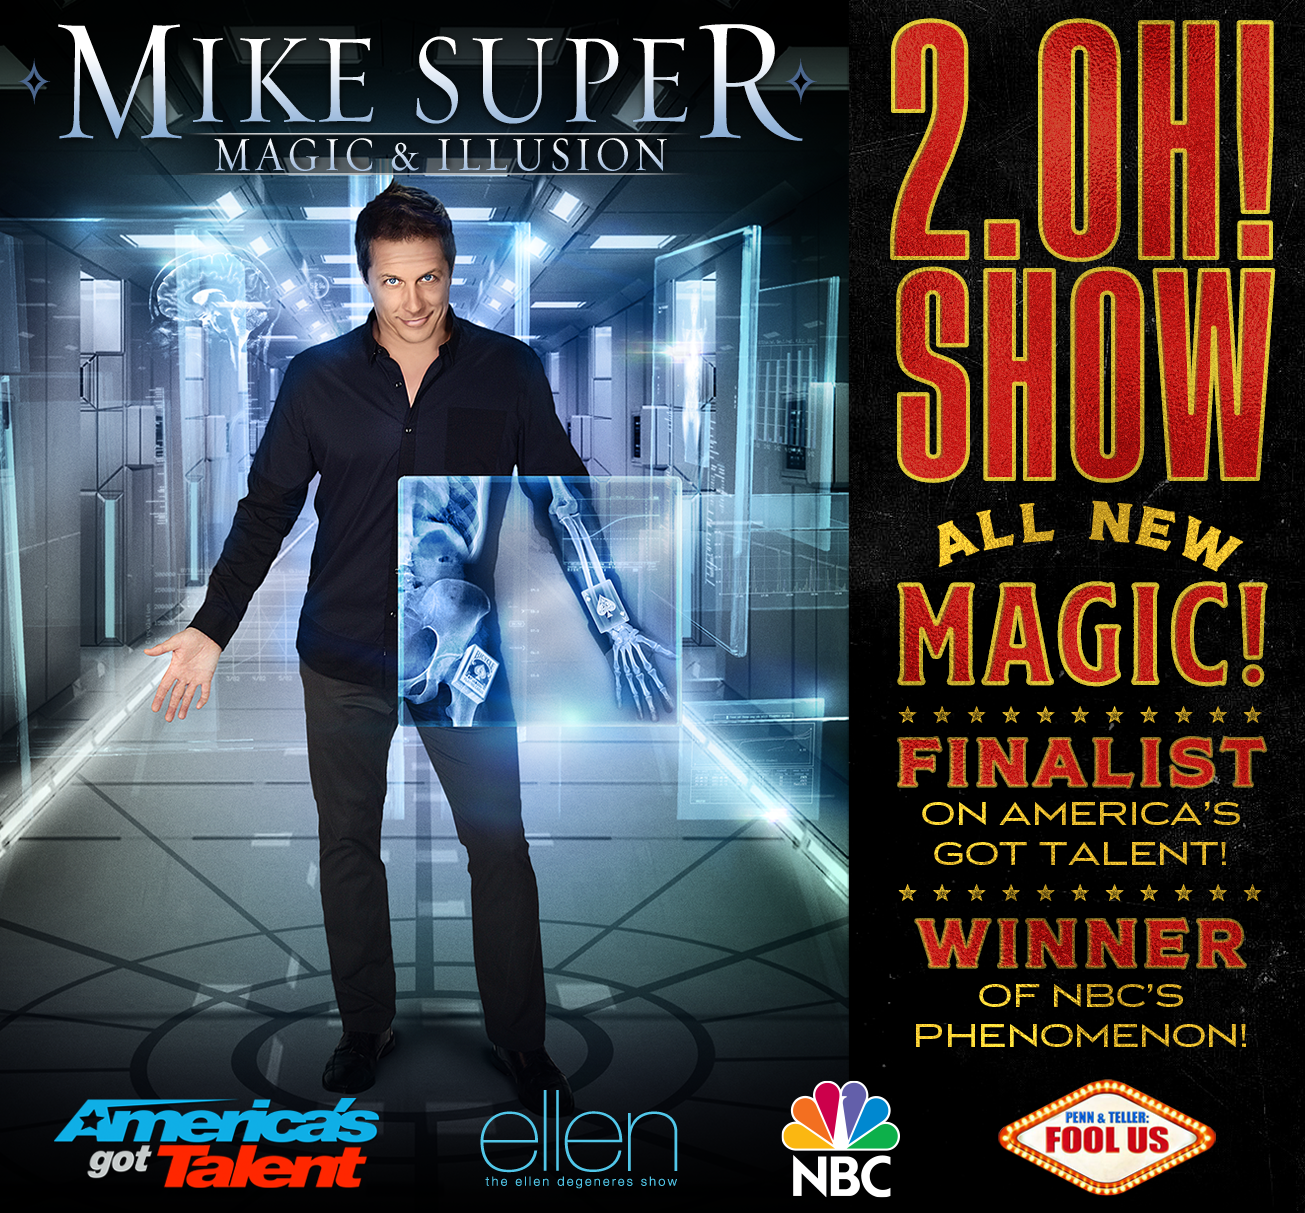 A promotional image for illusionist Mike Super is shown.